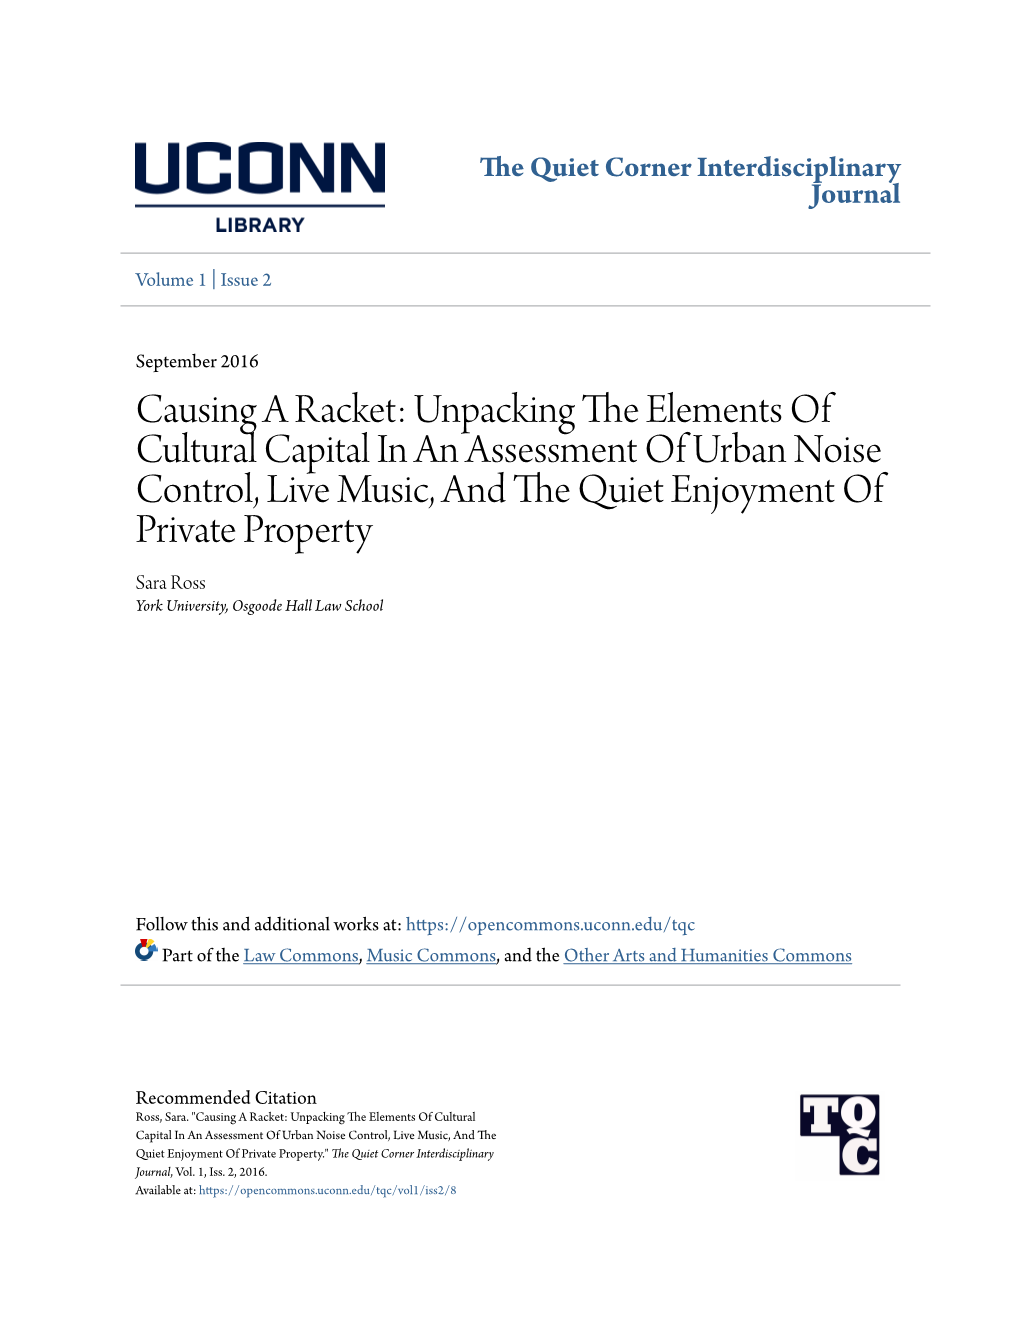 Causing a Racket: Unpacking the Elements of Cultural Capital in An